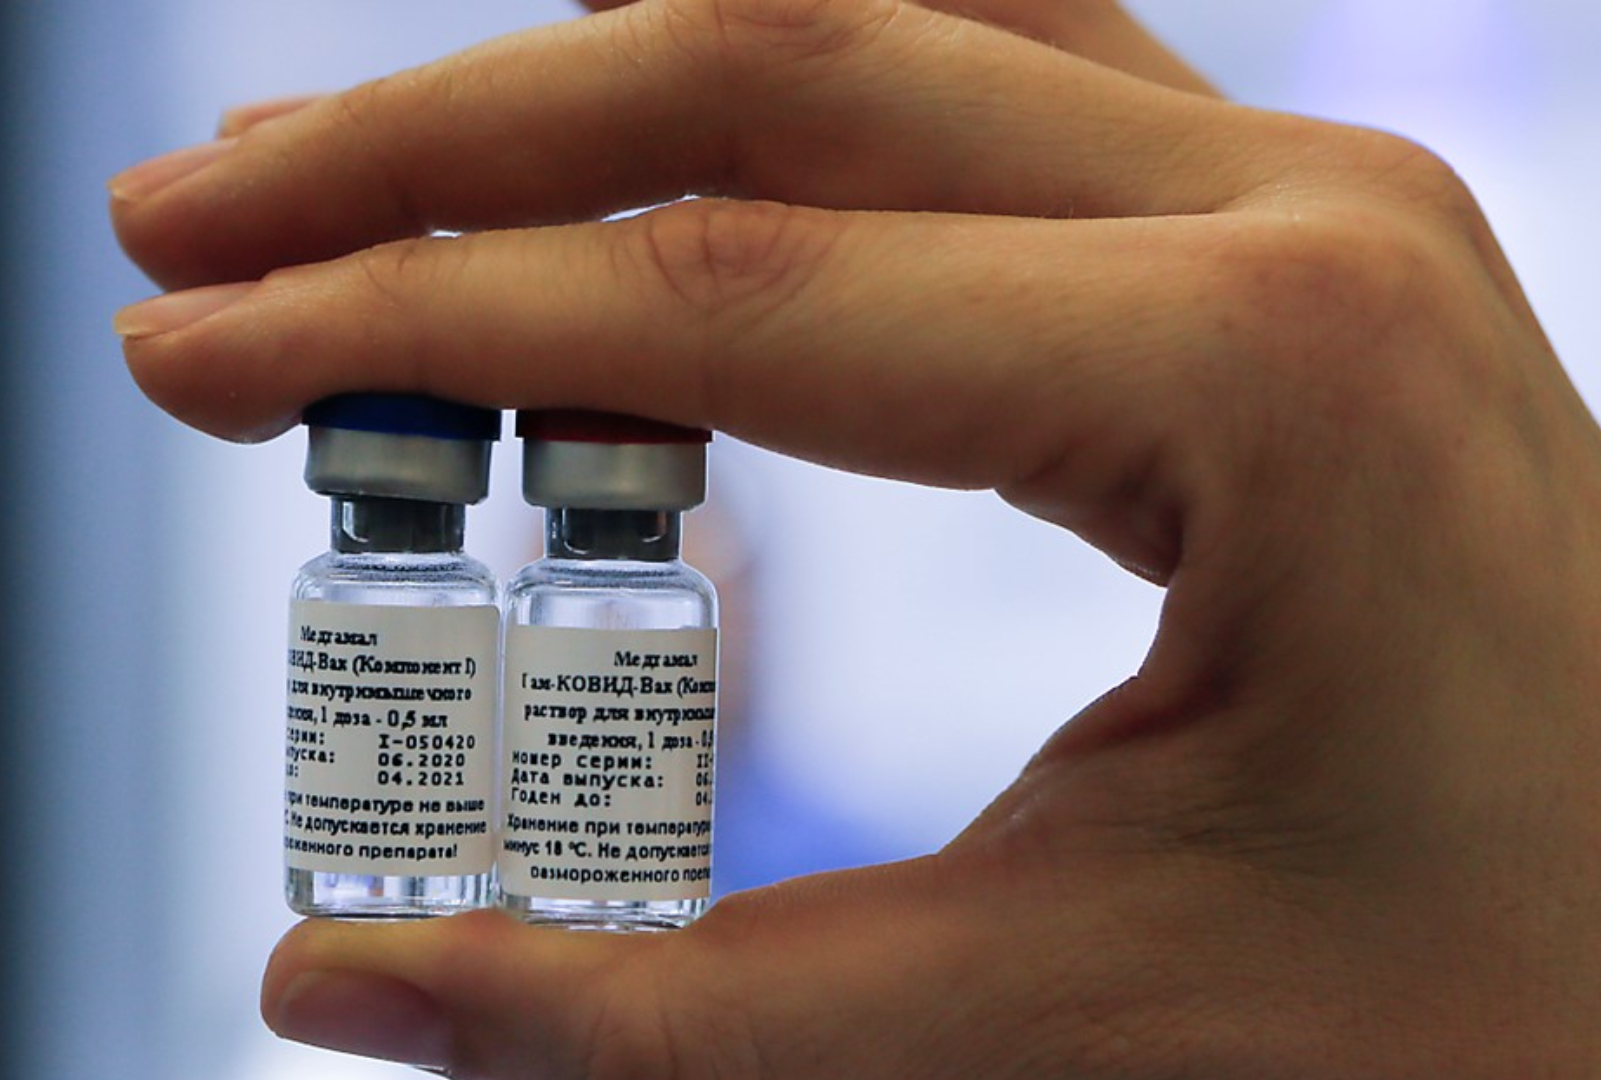 Russia Corona Vaccine Sputnik-V Will Be Available In India By November